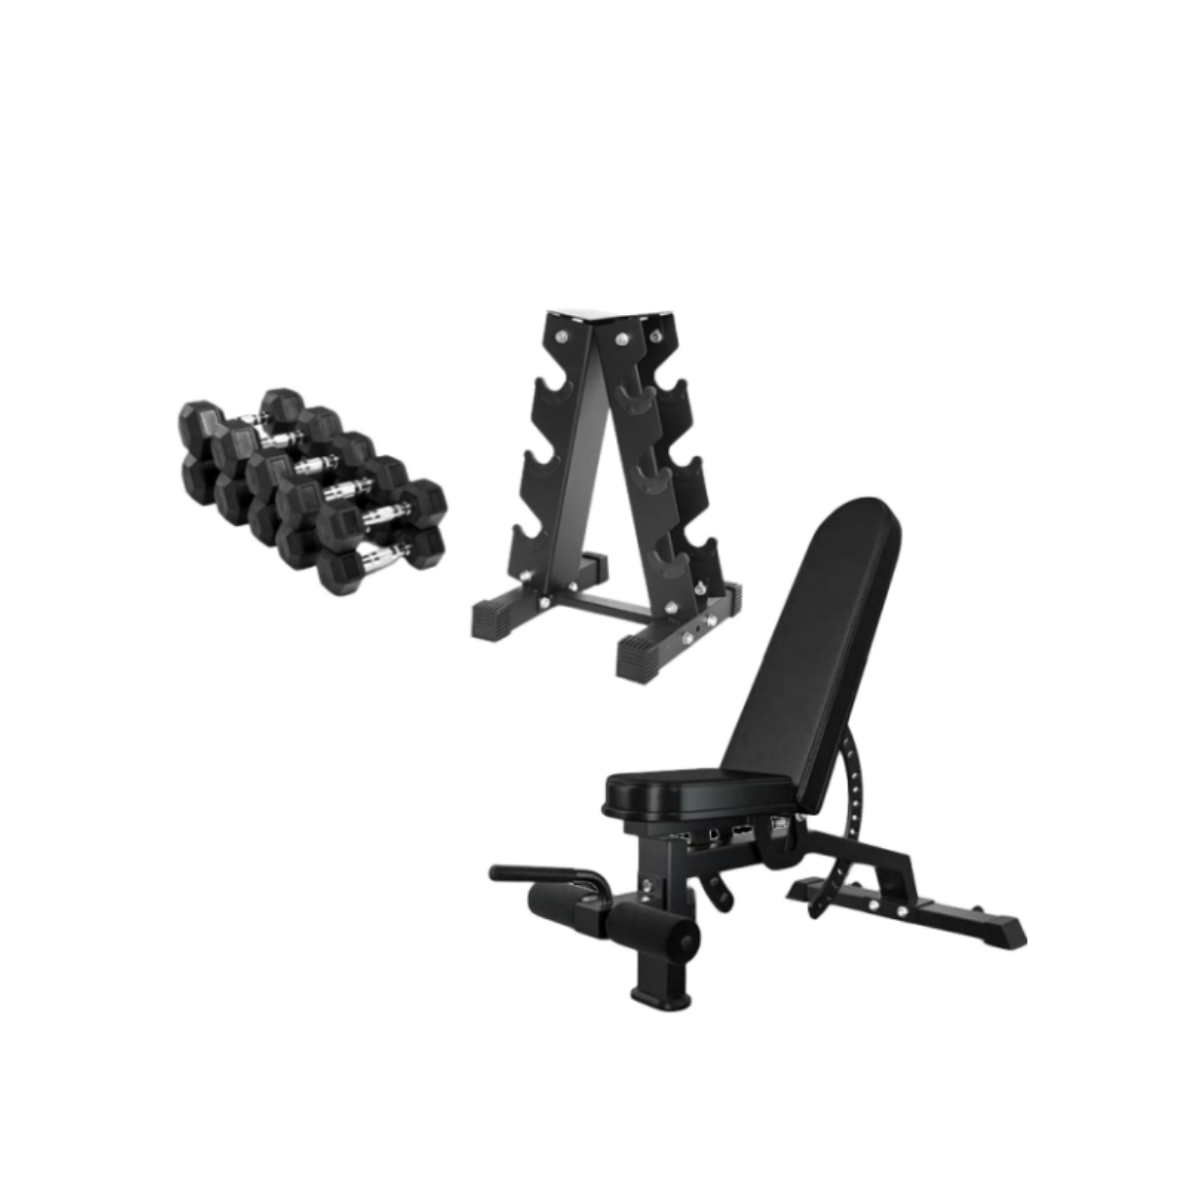 42KG Hex Dumbbells with Stand and Decline Bench